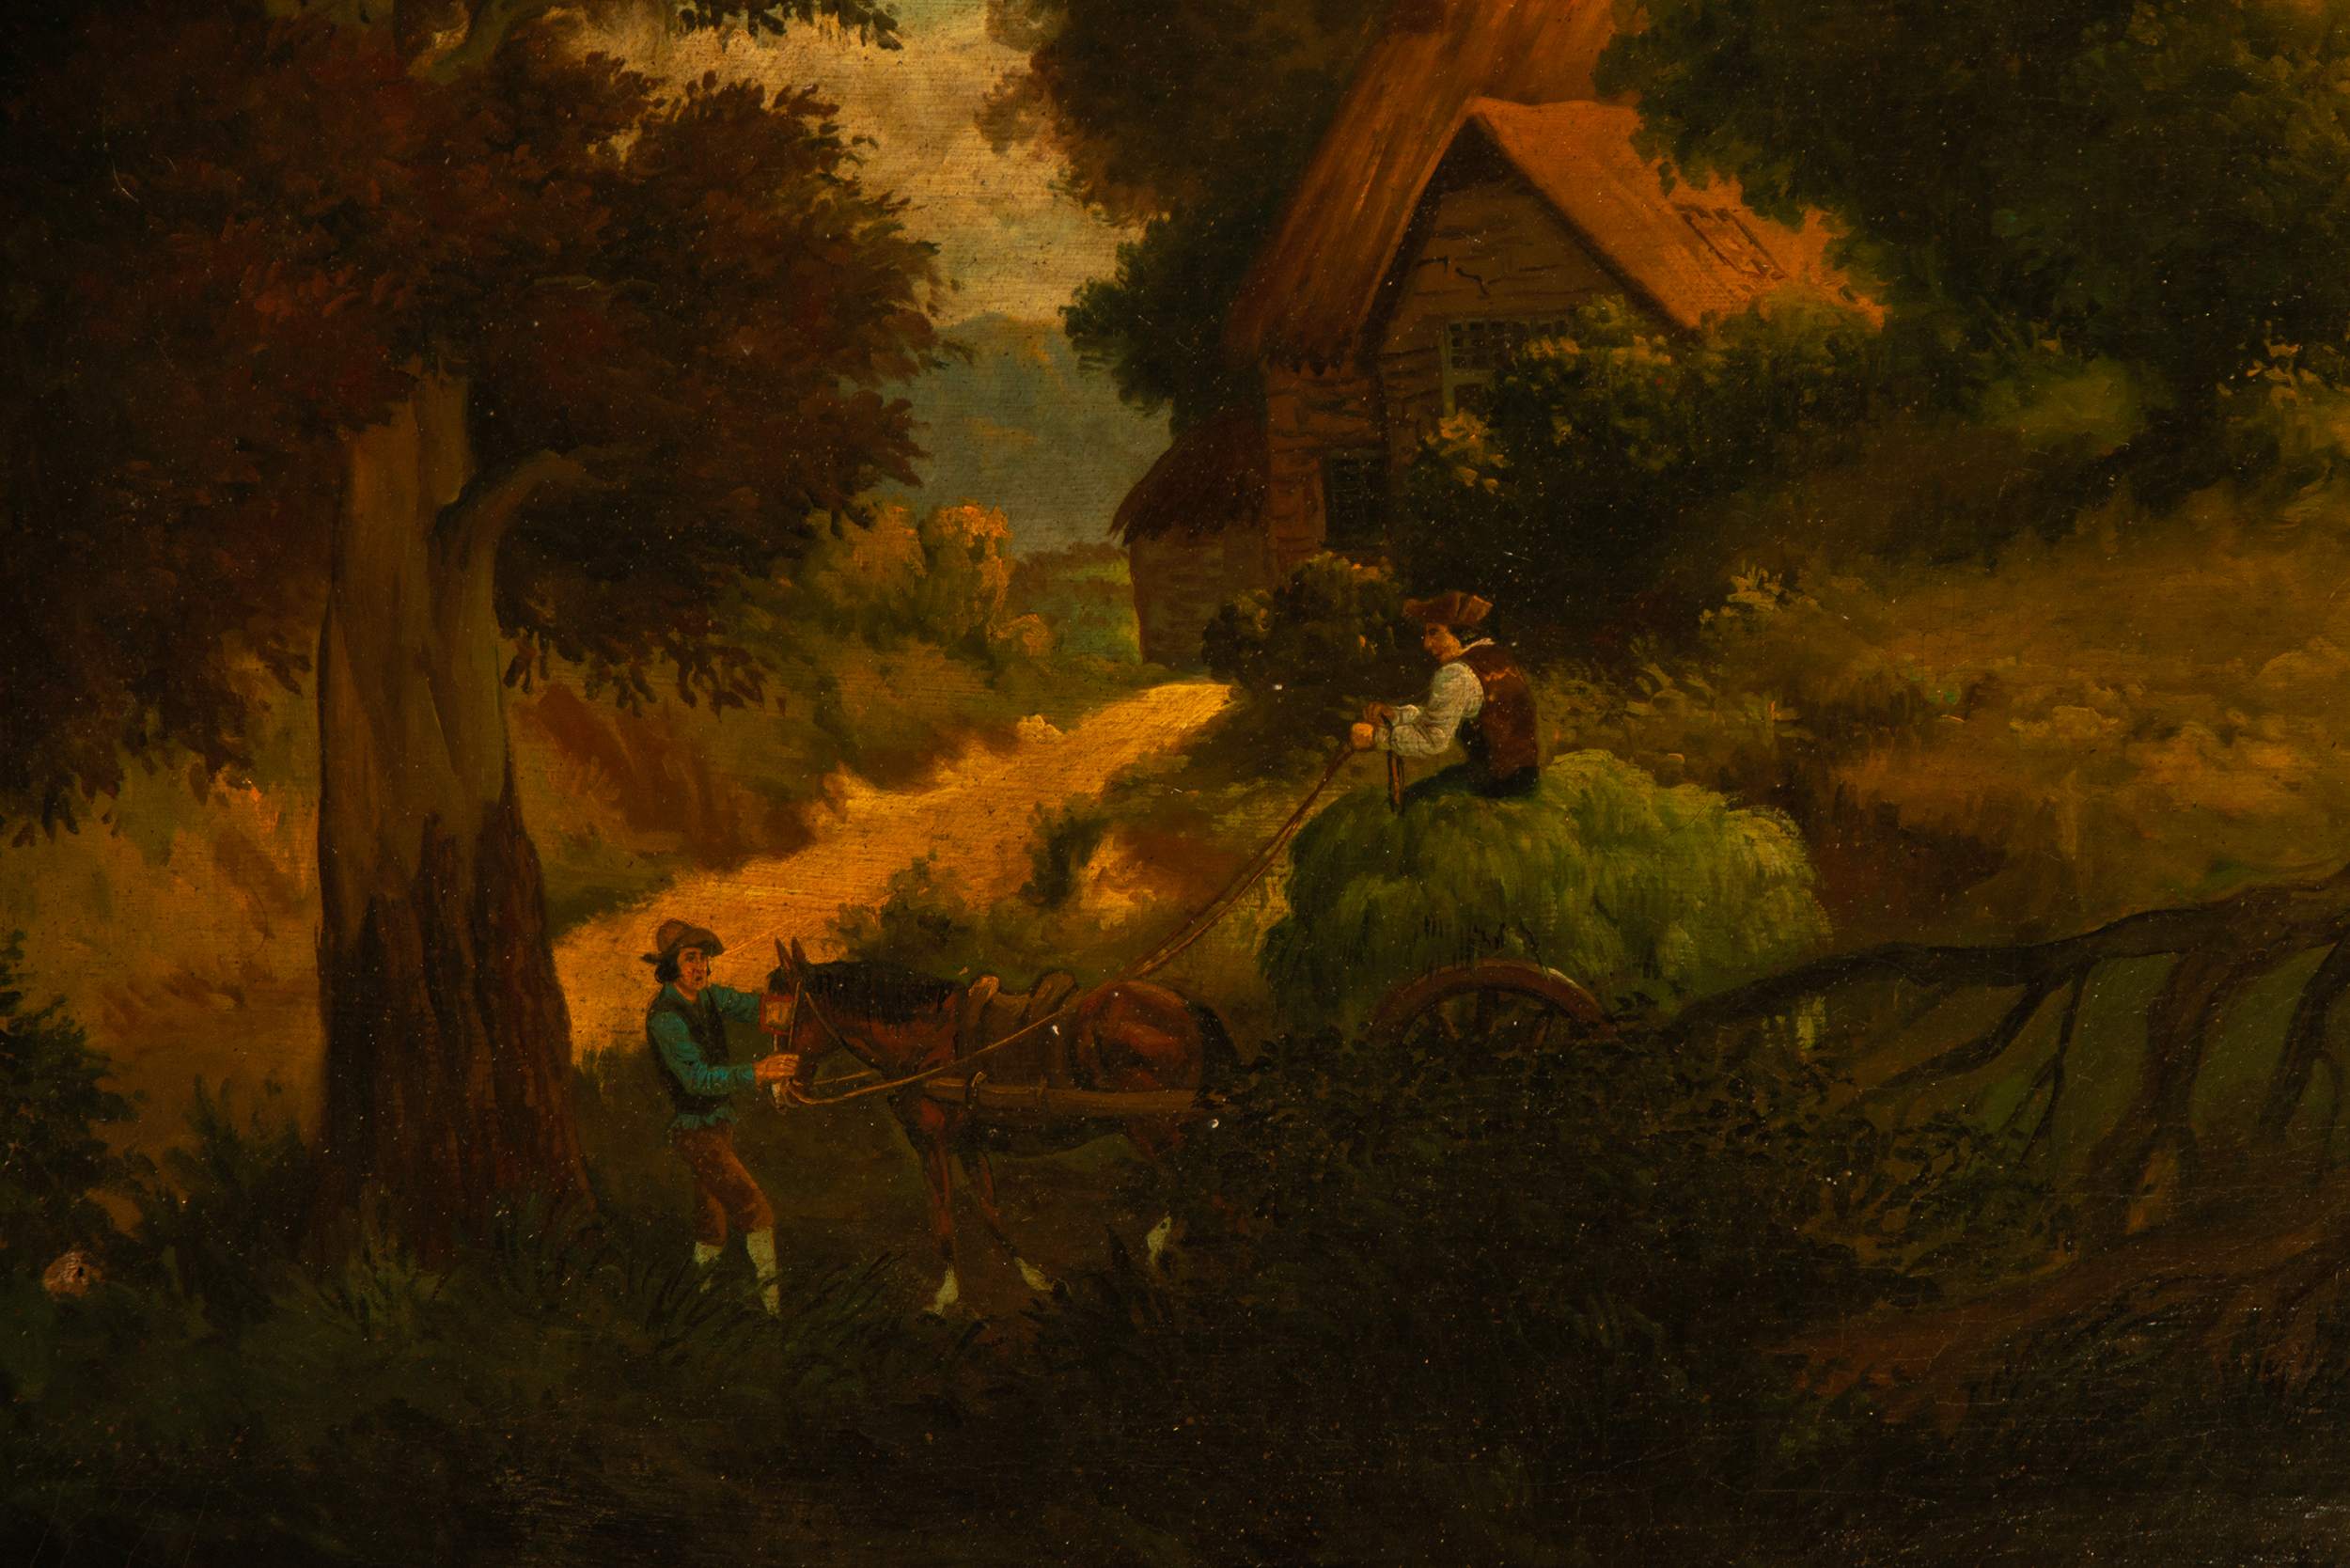 Country Scene with Woodcutters, 19th century Dutch school, following 17th century models - Image 3 of 6